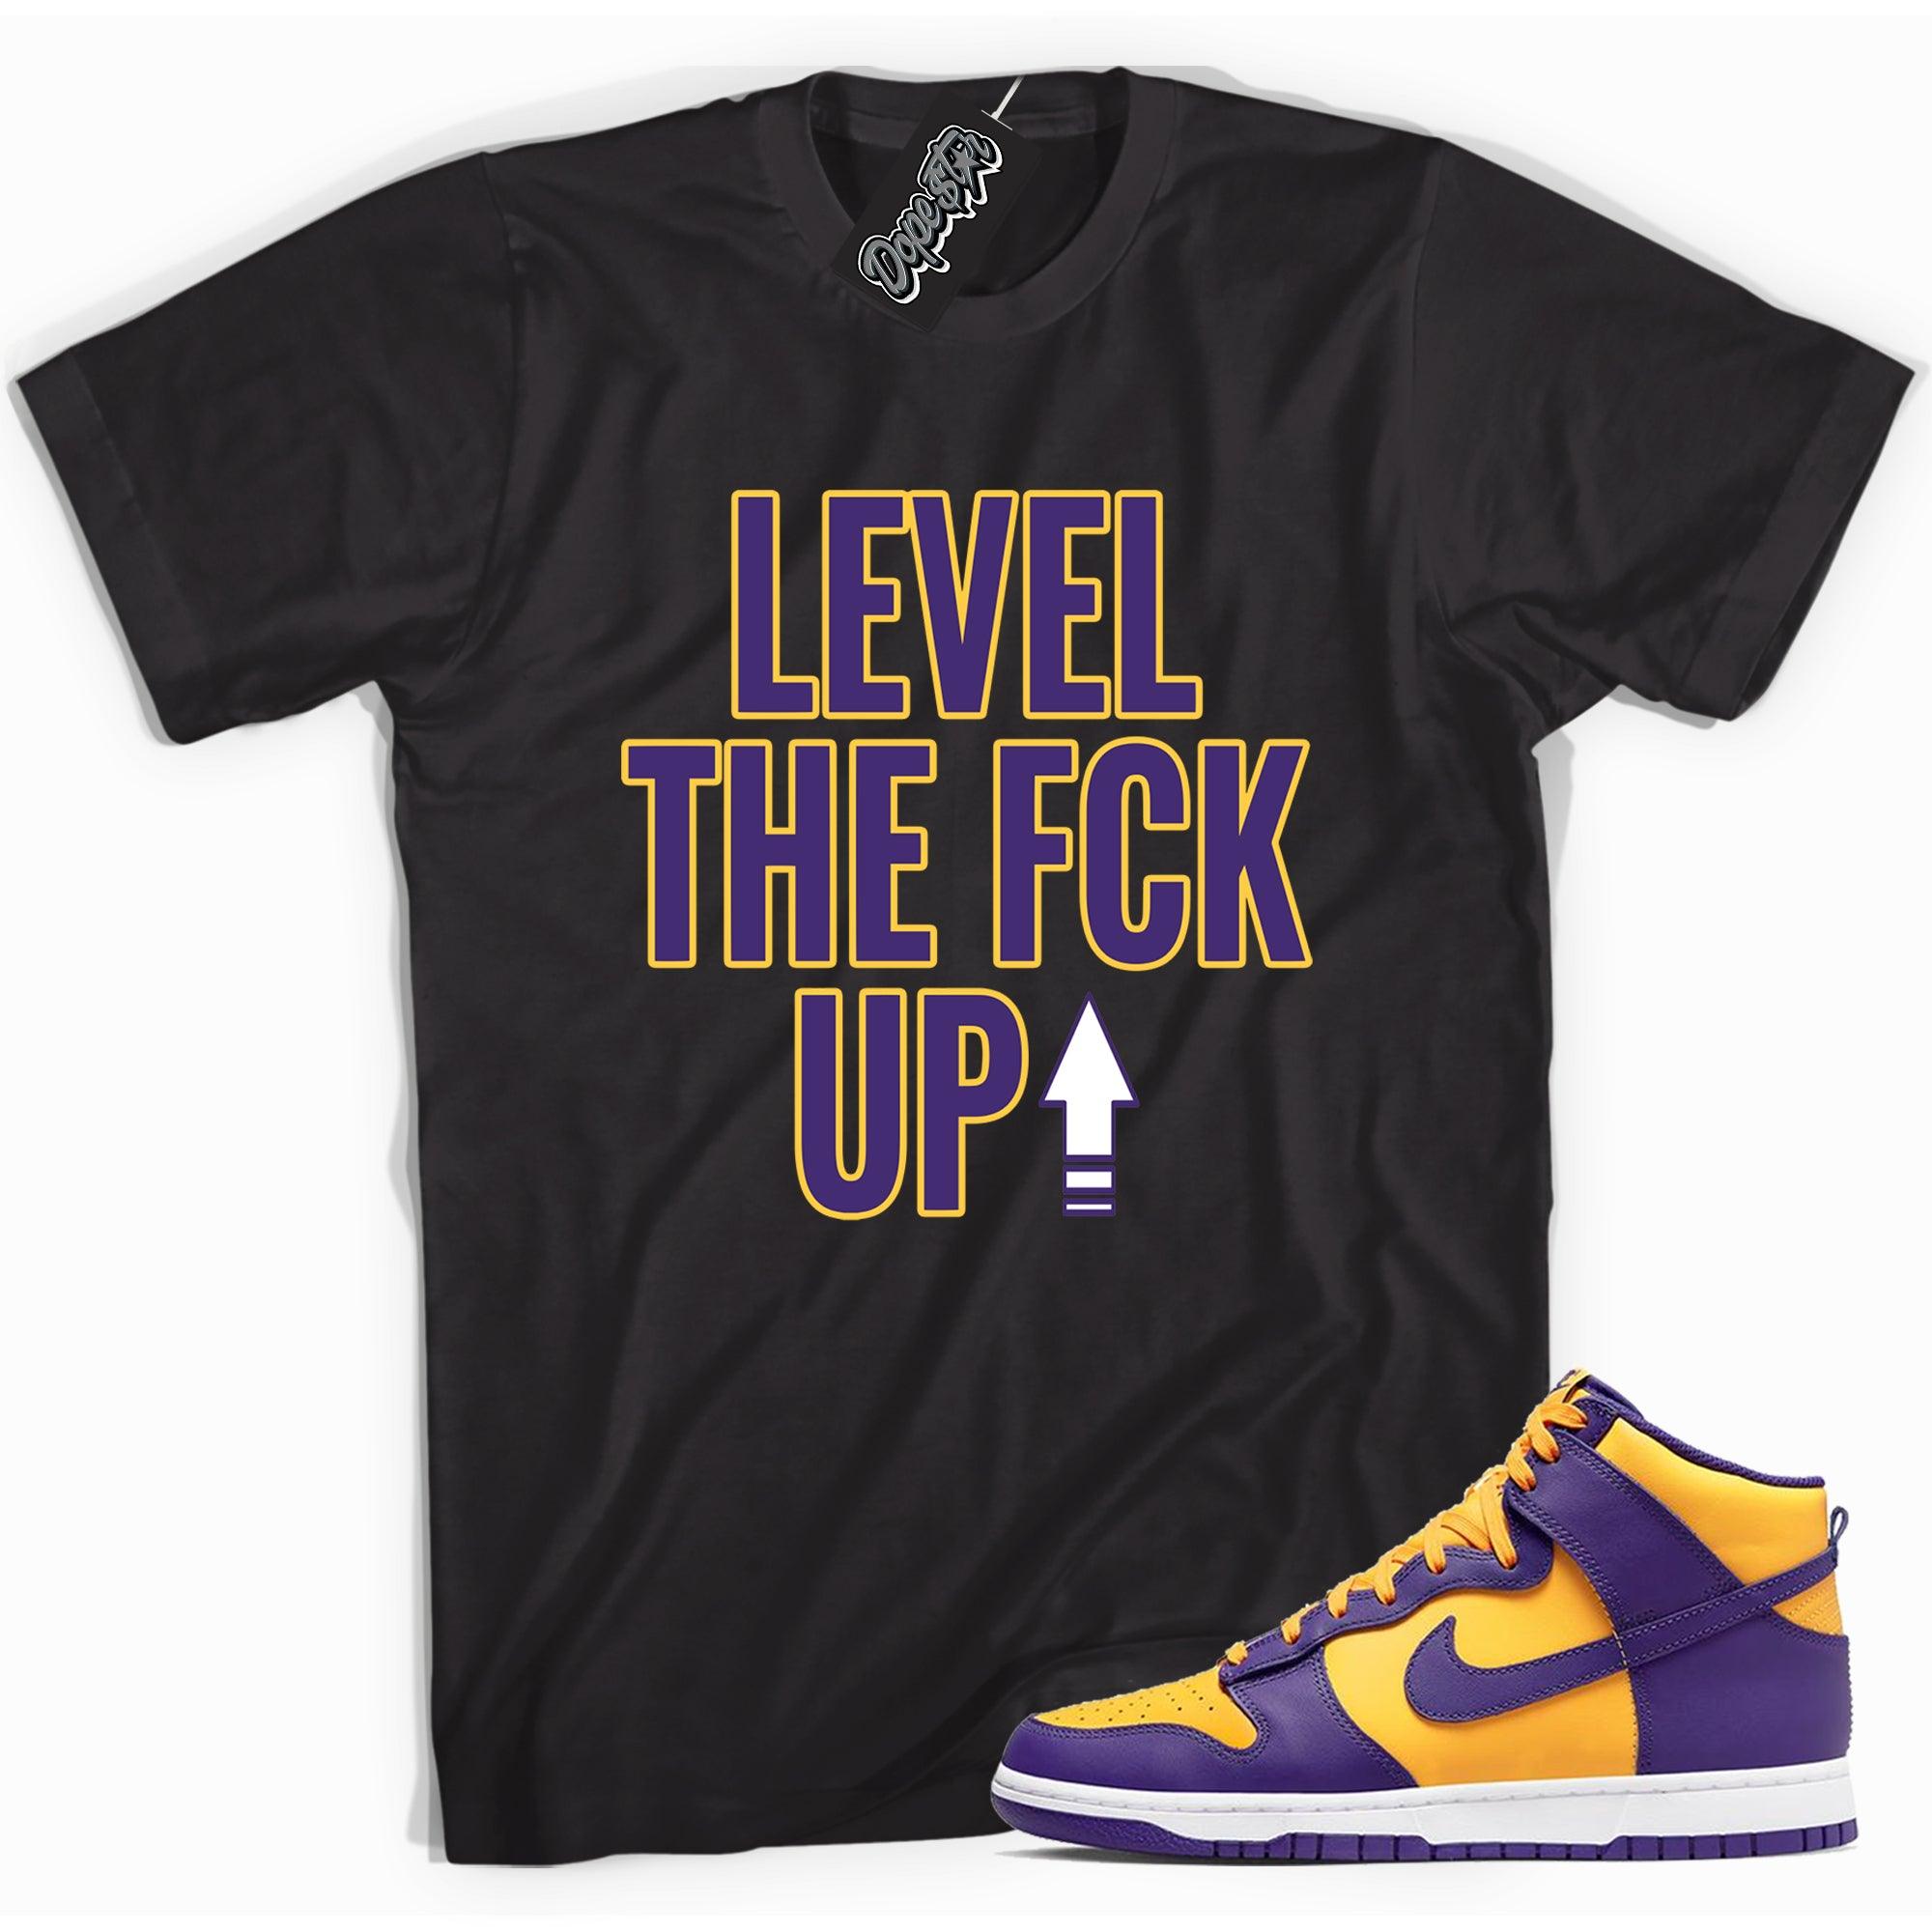 Cool black graphic tee with 'Level Up' print, that perfectly matches Nike Dunk High Lakers sneakers.